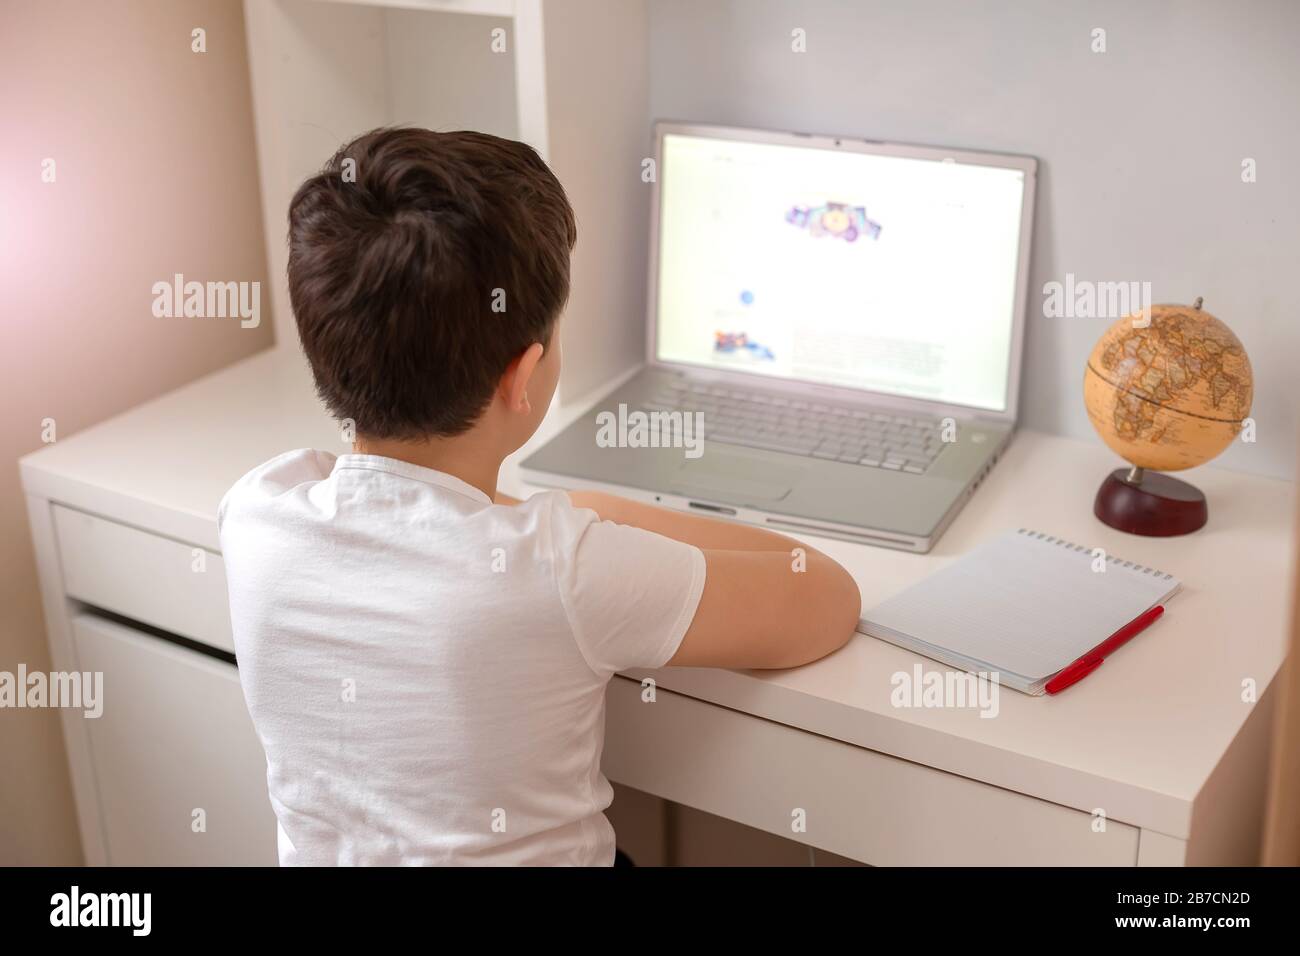 The boy sits with his back behind a laptop, looks at the monitor. Distance learning. Home Study Exam Preparation Stock Photo